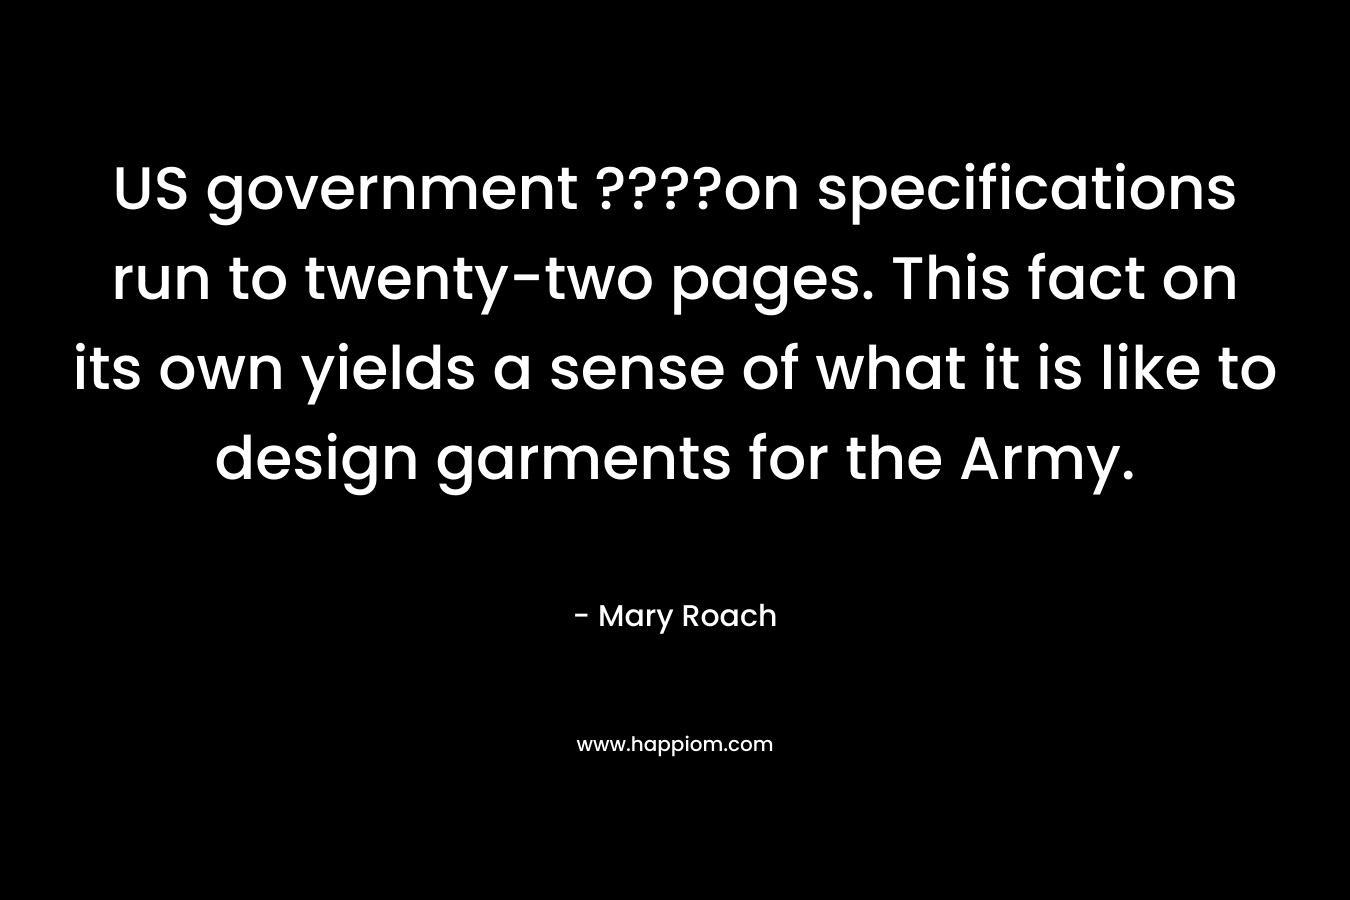 US government ????on specifications run to twenty-two pages. This fact on its own yields a sense of what it is like to design garments for the Army. – Mary Roach